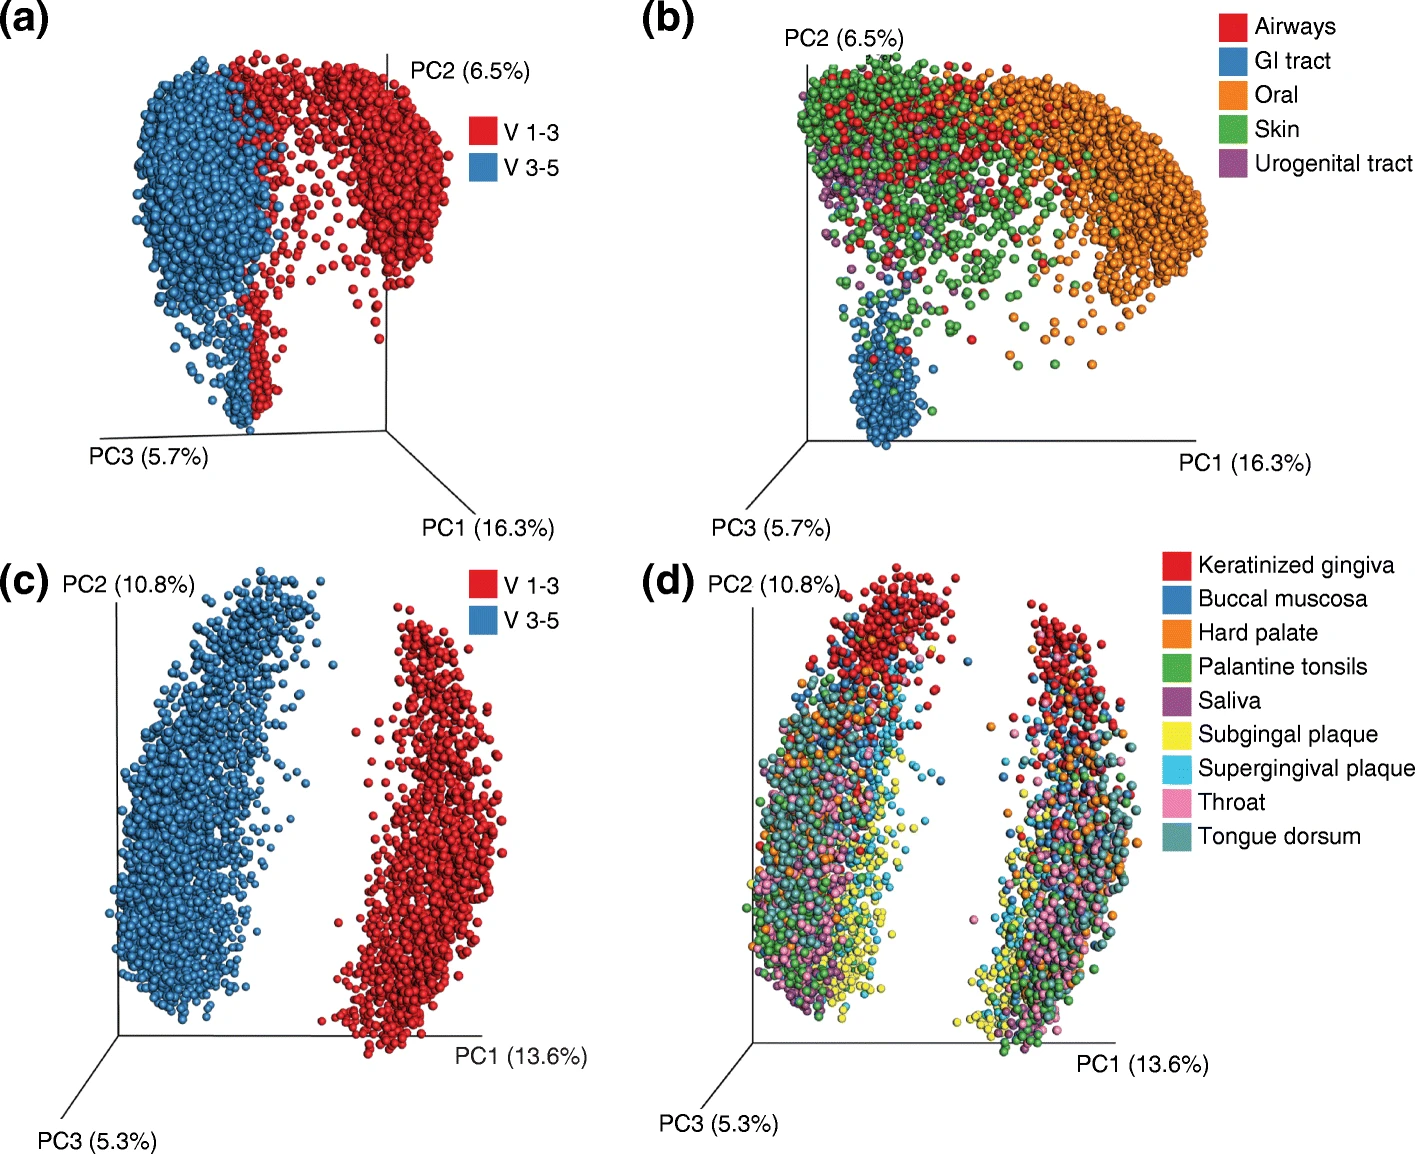 Figure 1 from Tiny Microbes, Enormous Impacts by Debelius et al. The foru panel figures shows two sets of PCoAs from the Human Microbiome Project. The top row shows the same PCoA, of all bodysites colored by hypervariable region (left) and bodysite(right). The plot shows that PC2 splits by hypervariable region, but PC1 and PC3 vary by bodysite. The bottom row shows the oral samples only,. colored by hypervaraible region and bodysite. For oral samples, speration on PC1 is associated with the hypervariable region PC2 with oral sample.